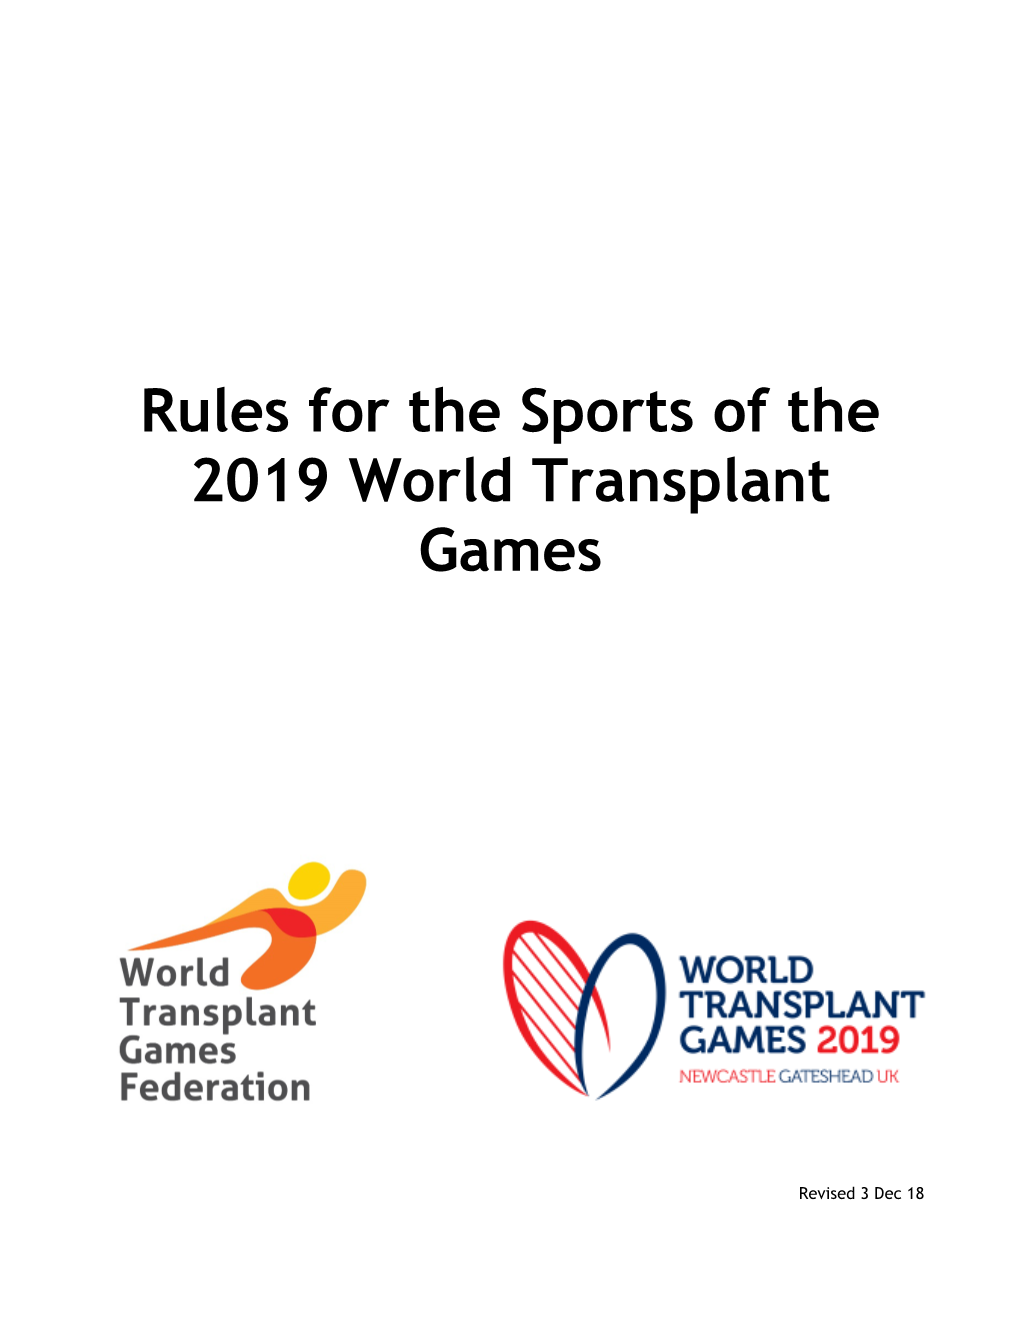 Rules for the Sports of the 2019 World Transplant Games